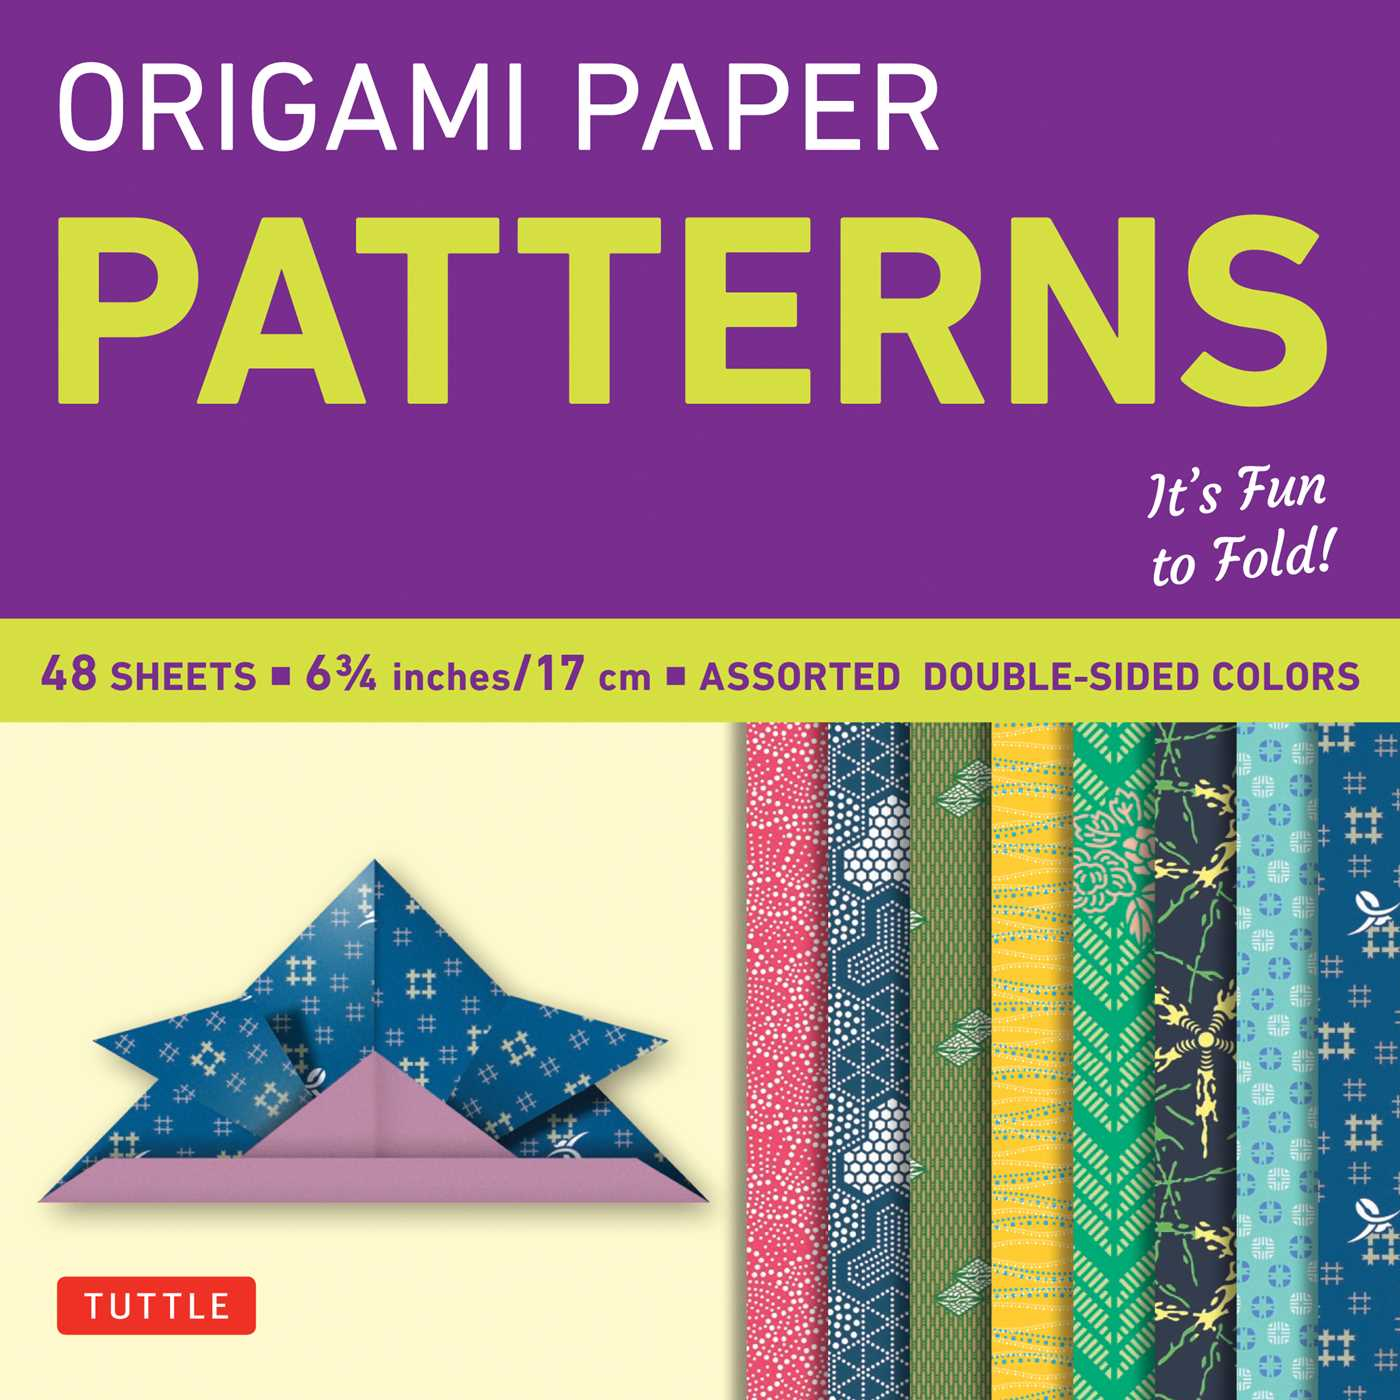 Paper Origami Designs Origami Paper Patterns Small 6 34 49 Sheets Tuttle Origami Paper High Quality Origami Sheets Printed With 8 Different Designs Instructions